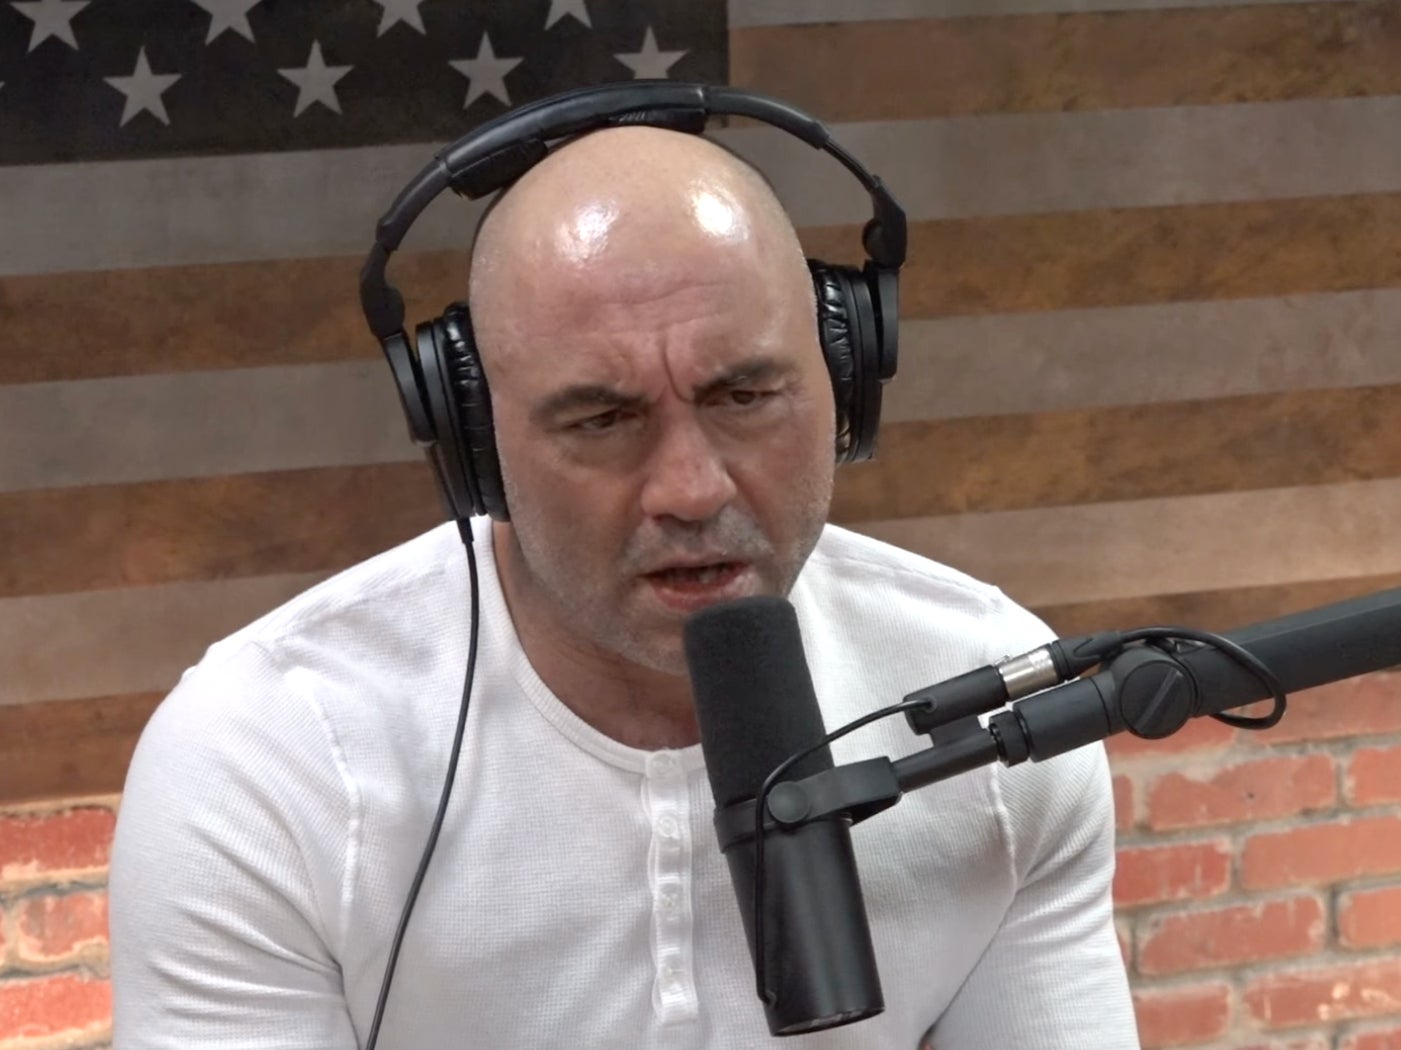 Joe Rogan is facing severe backlash over his podcast on Spotify